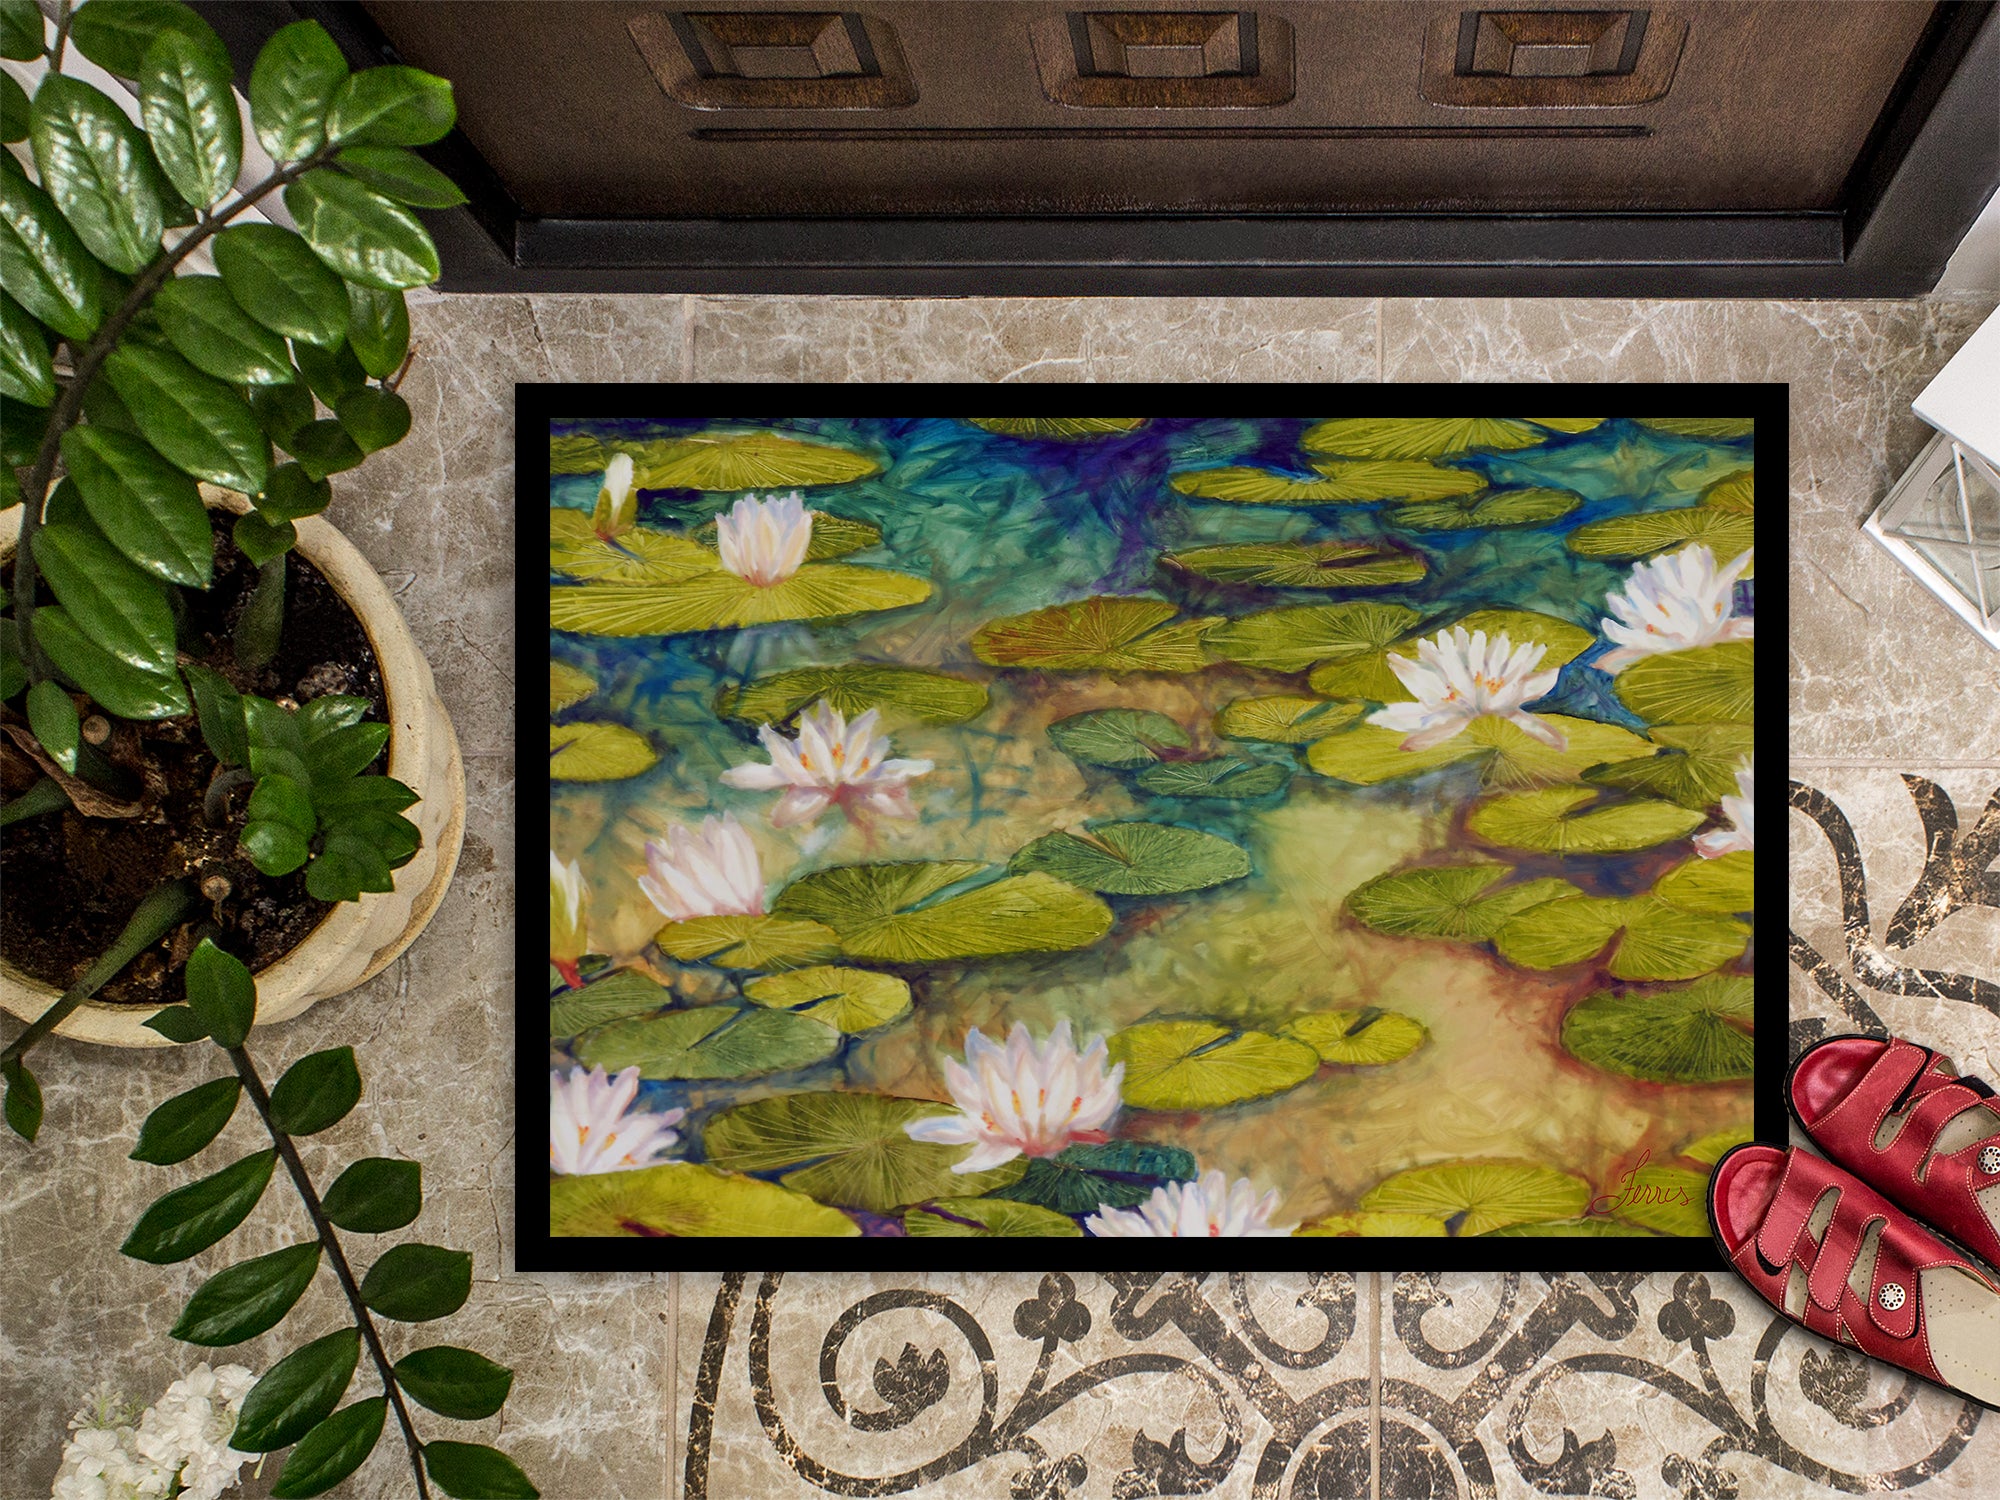 Waterlillies by Ferris Hotard Indoor or Outdoor Mat 18x27 - the-store.com